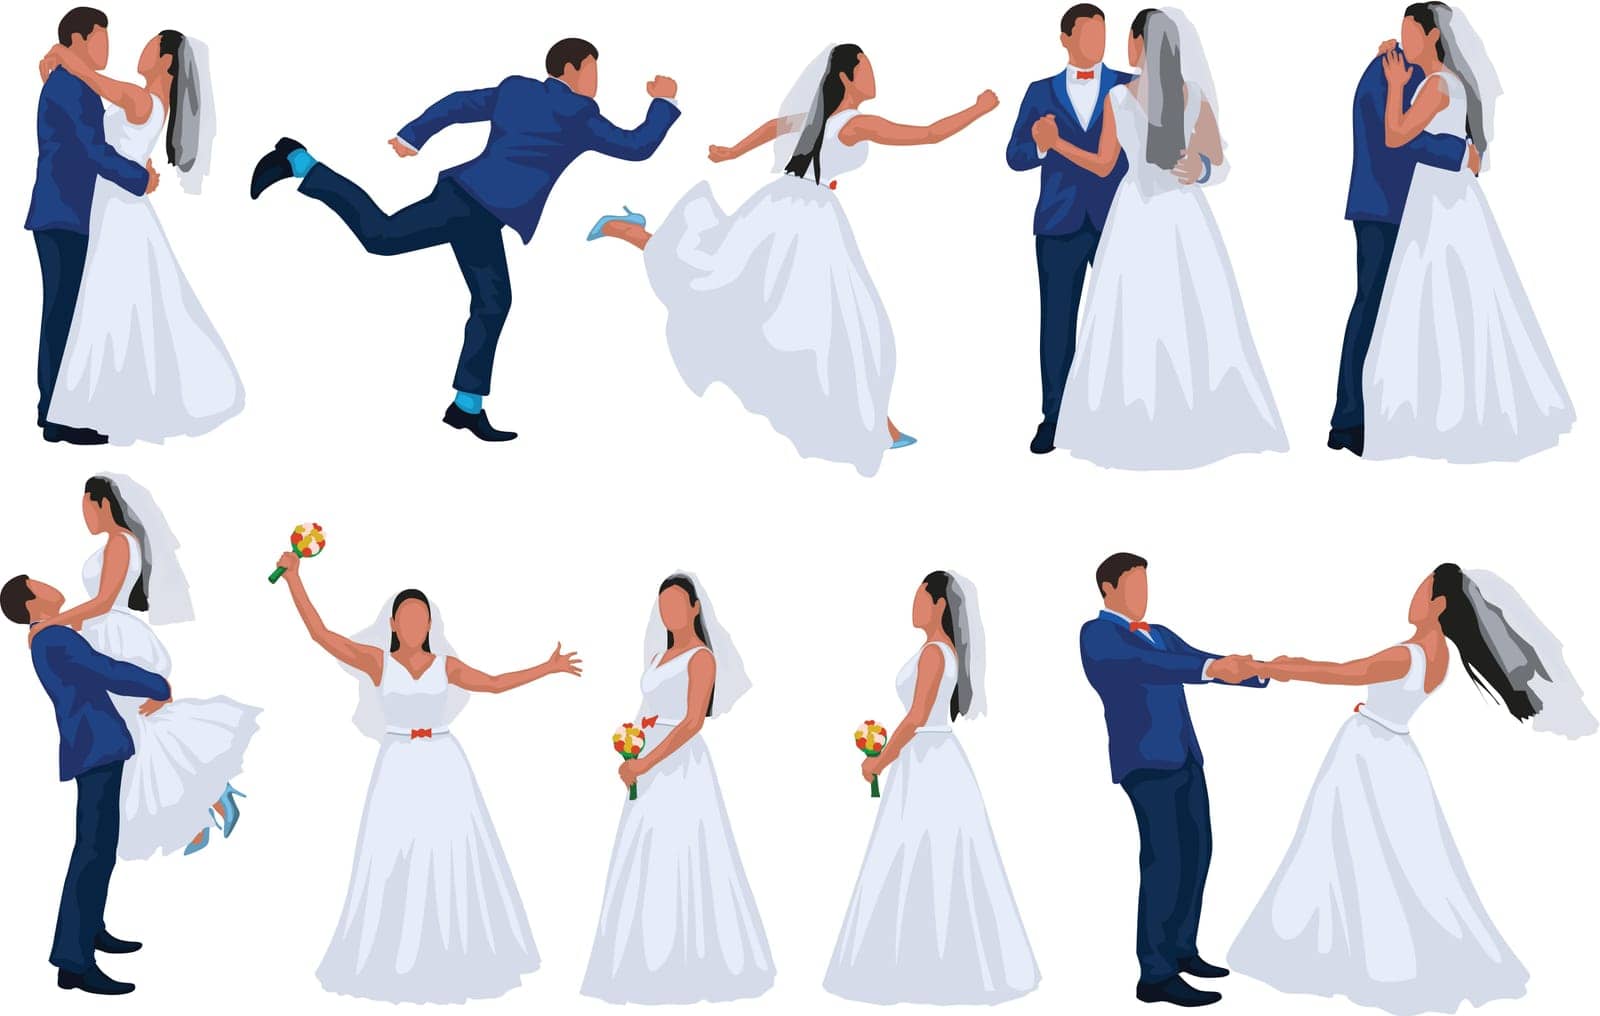 illustration wedding set of groom and bride in different poses isolated on white background